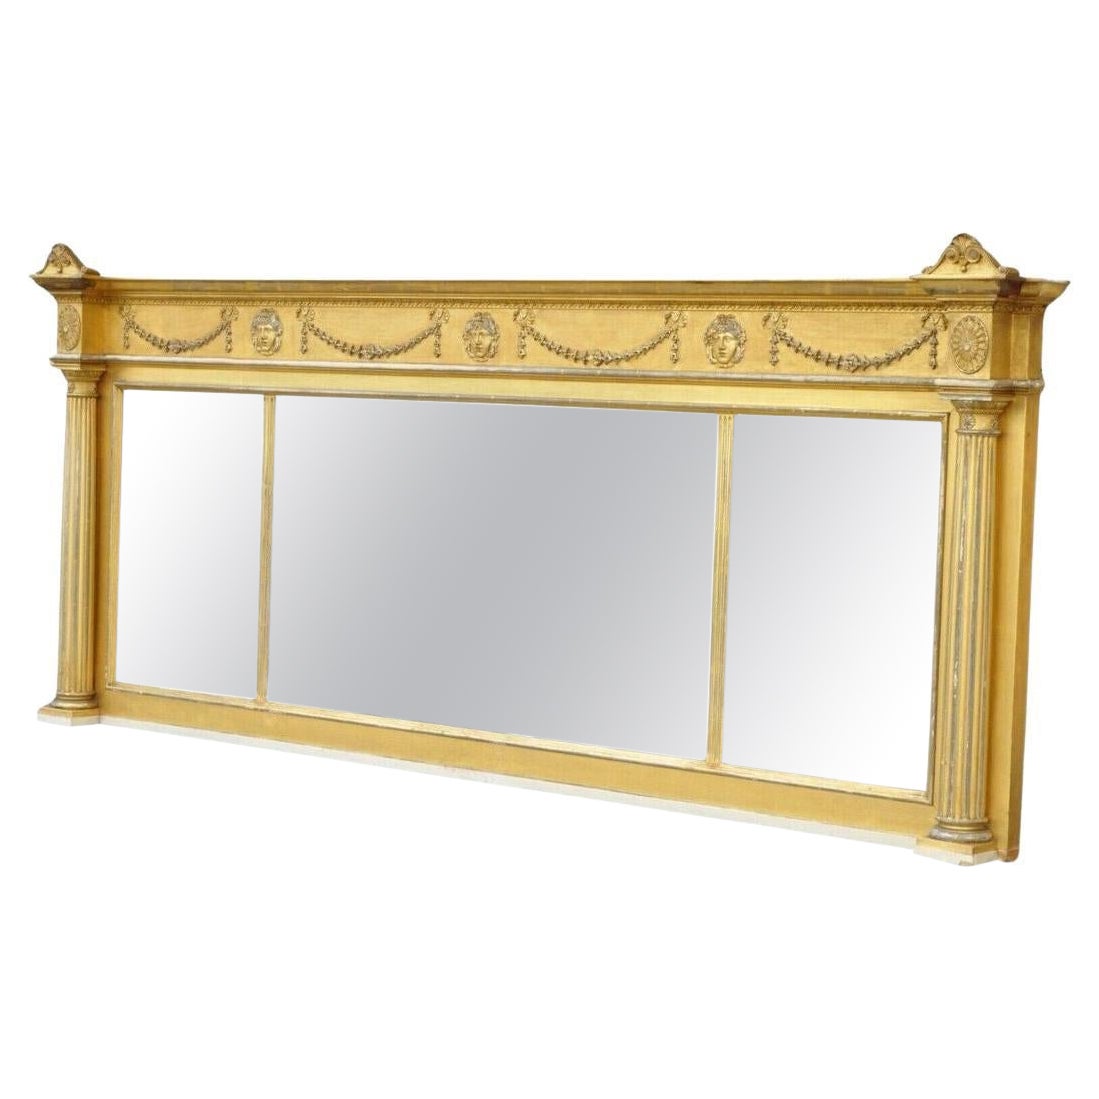 Antique Large 83" Victorian Gold Giltwood Figural Triple Overmantle Mirror